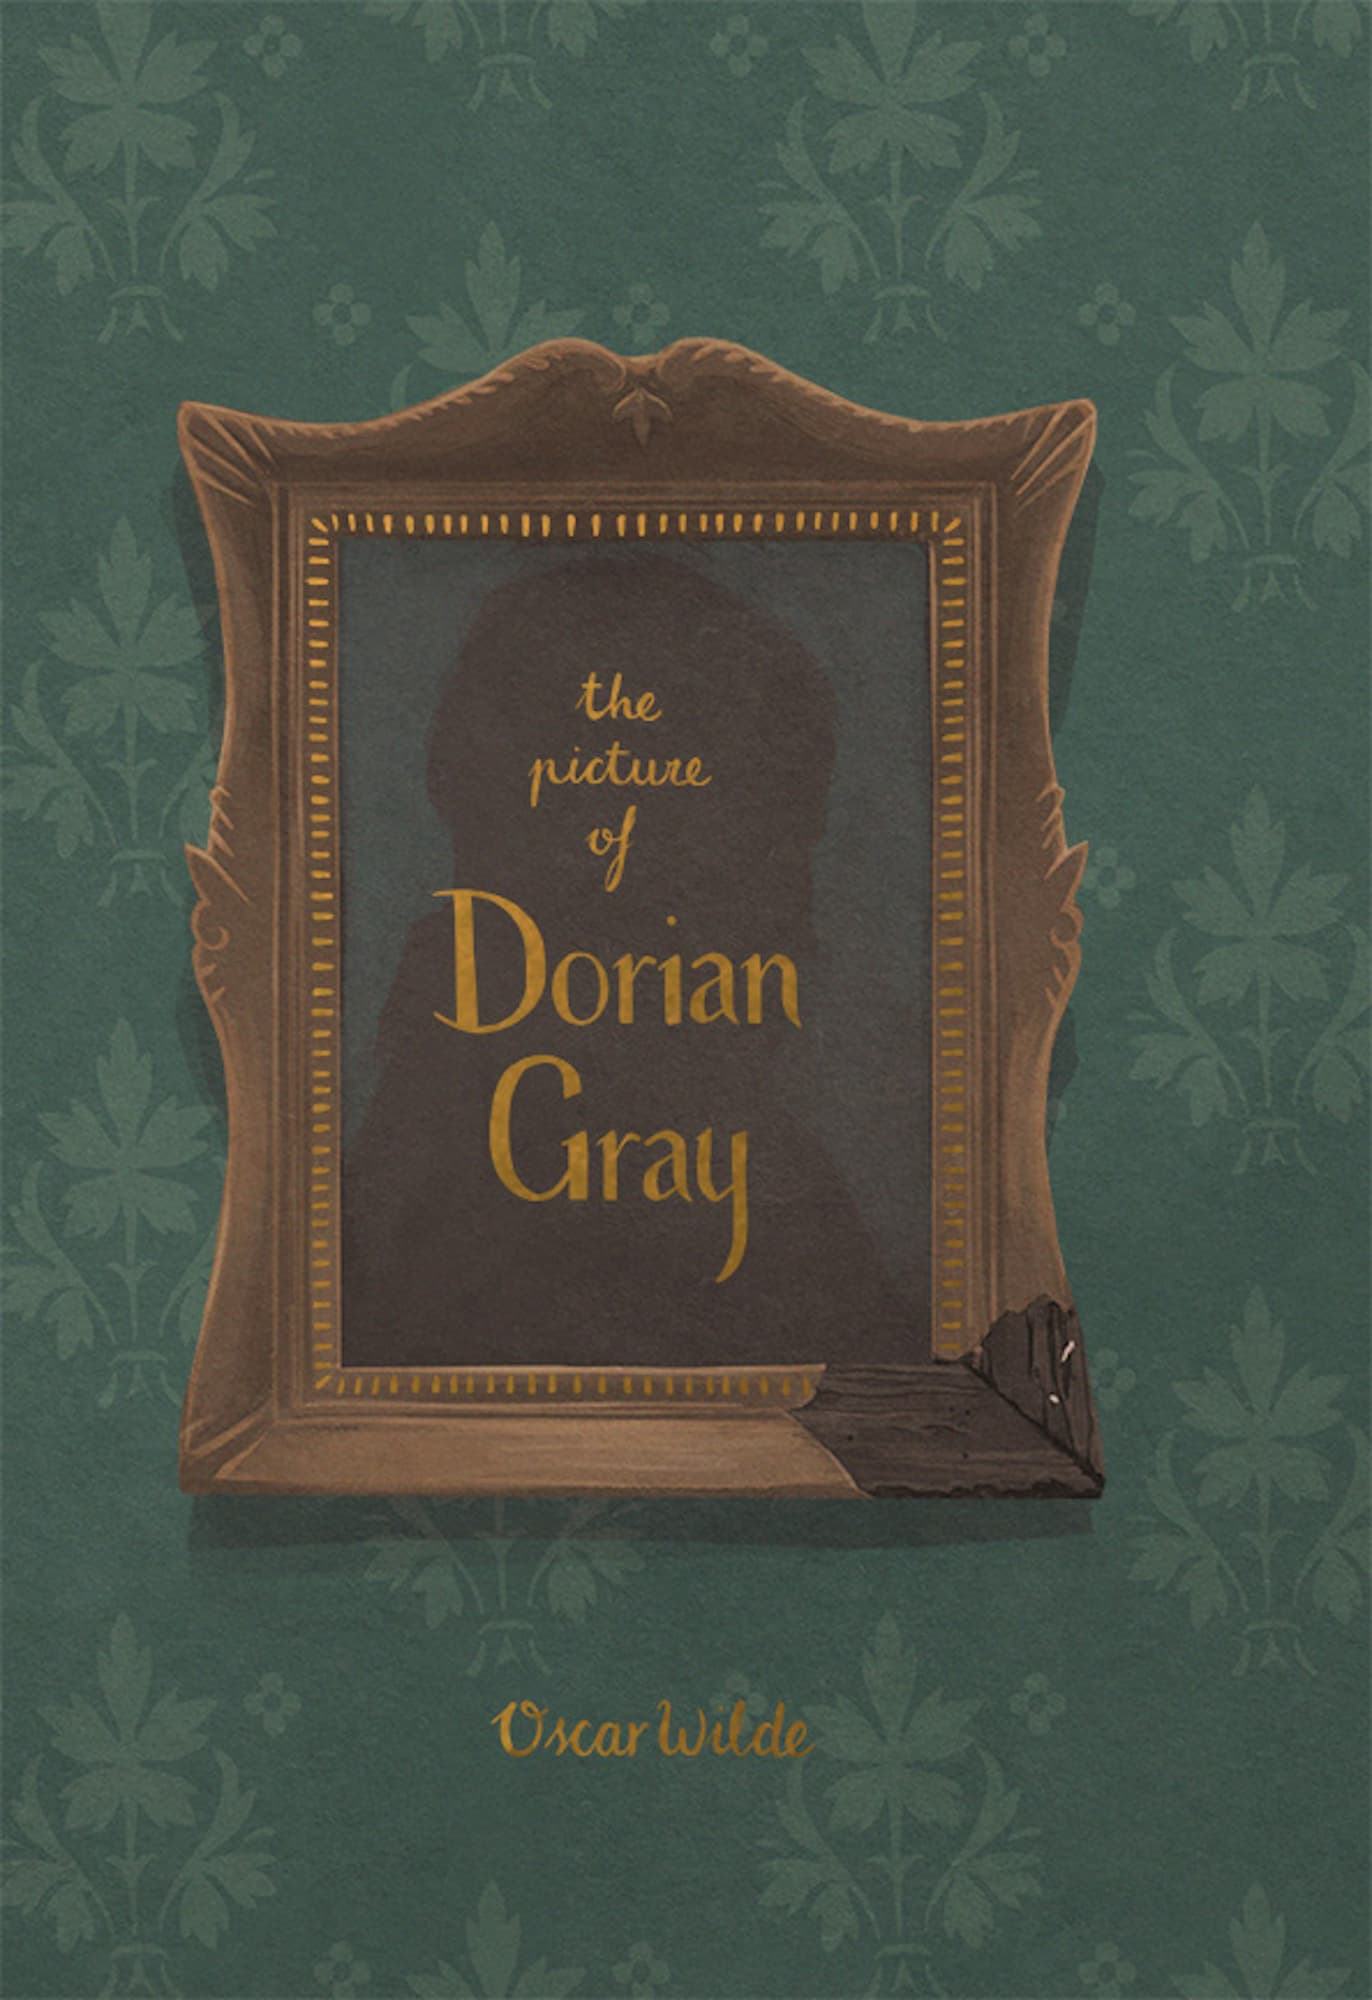 The Picture of Dorian Gray (Collector's Edition)